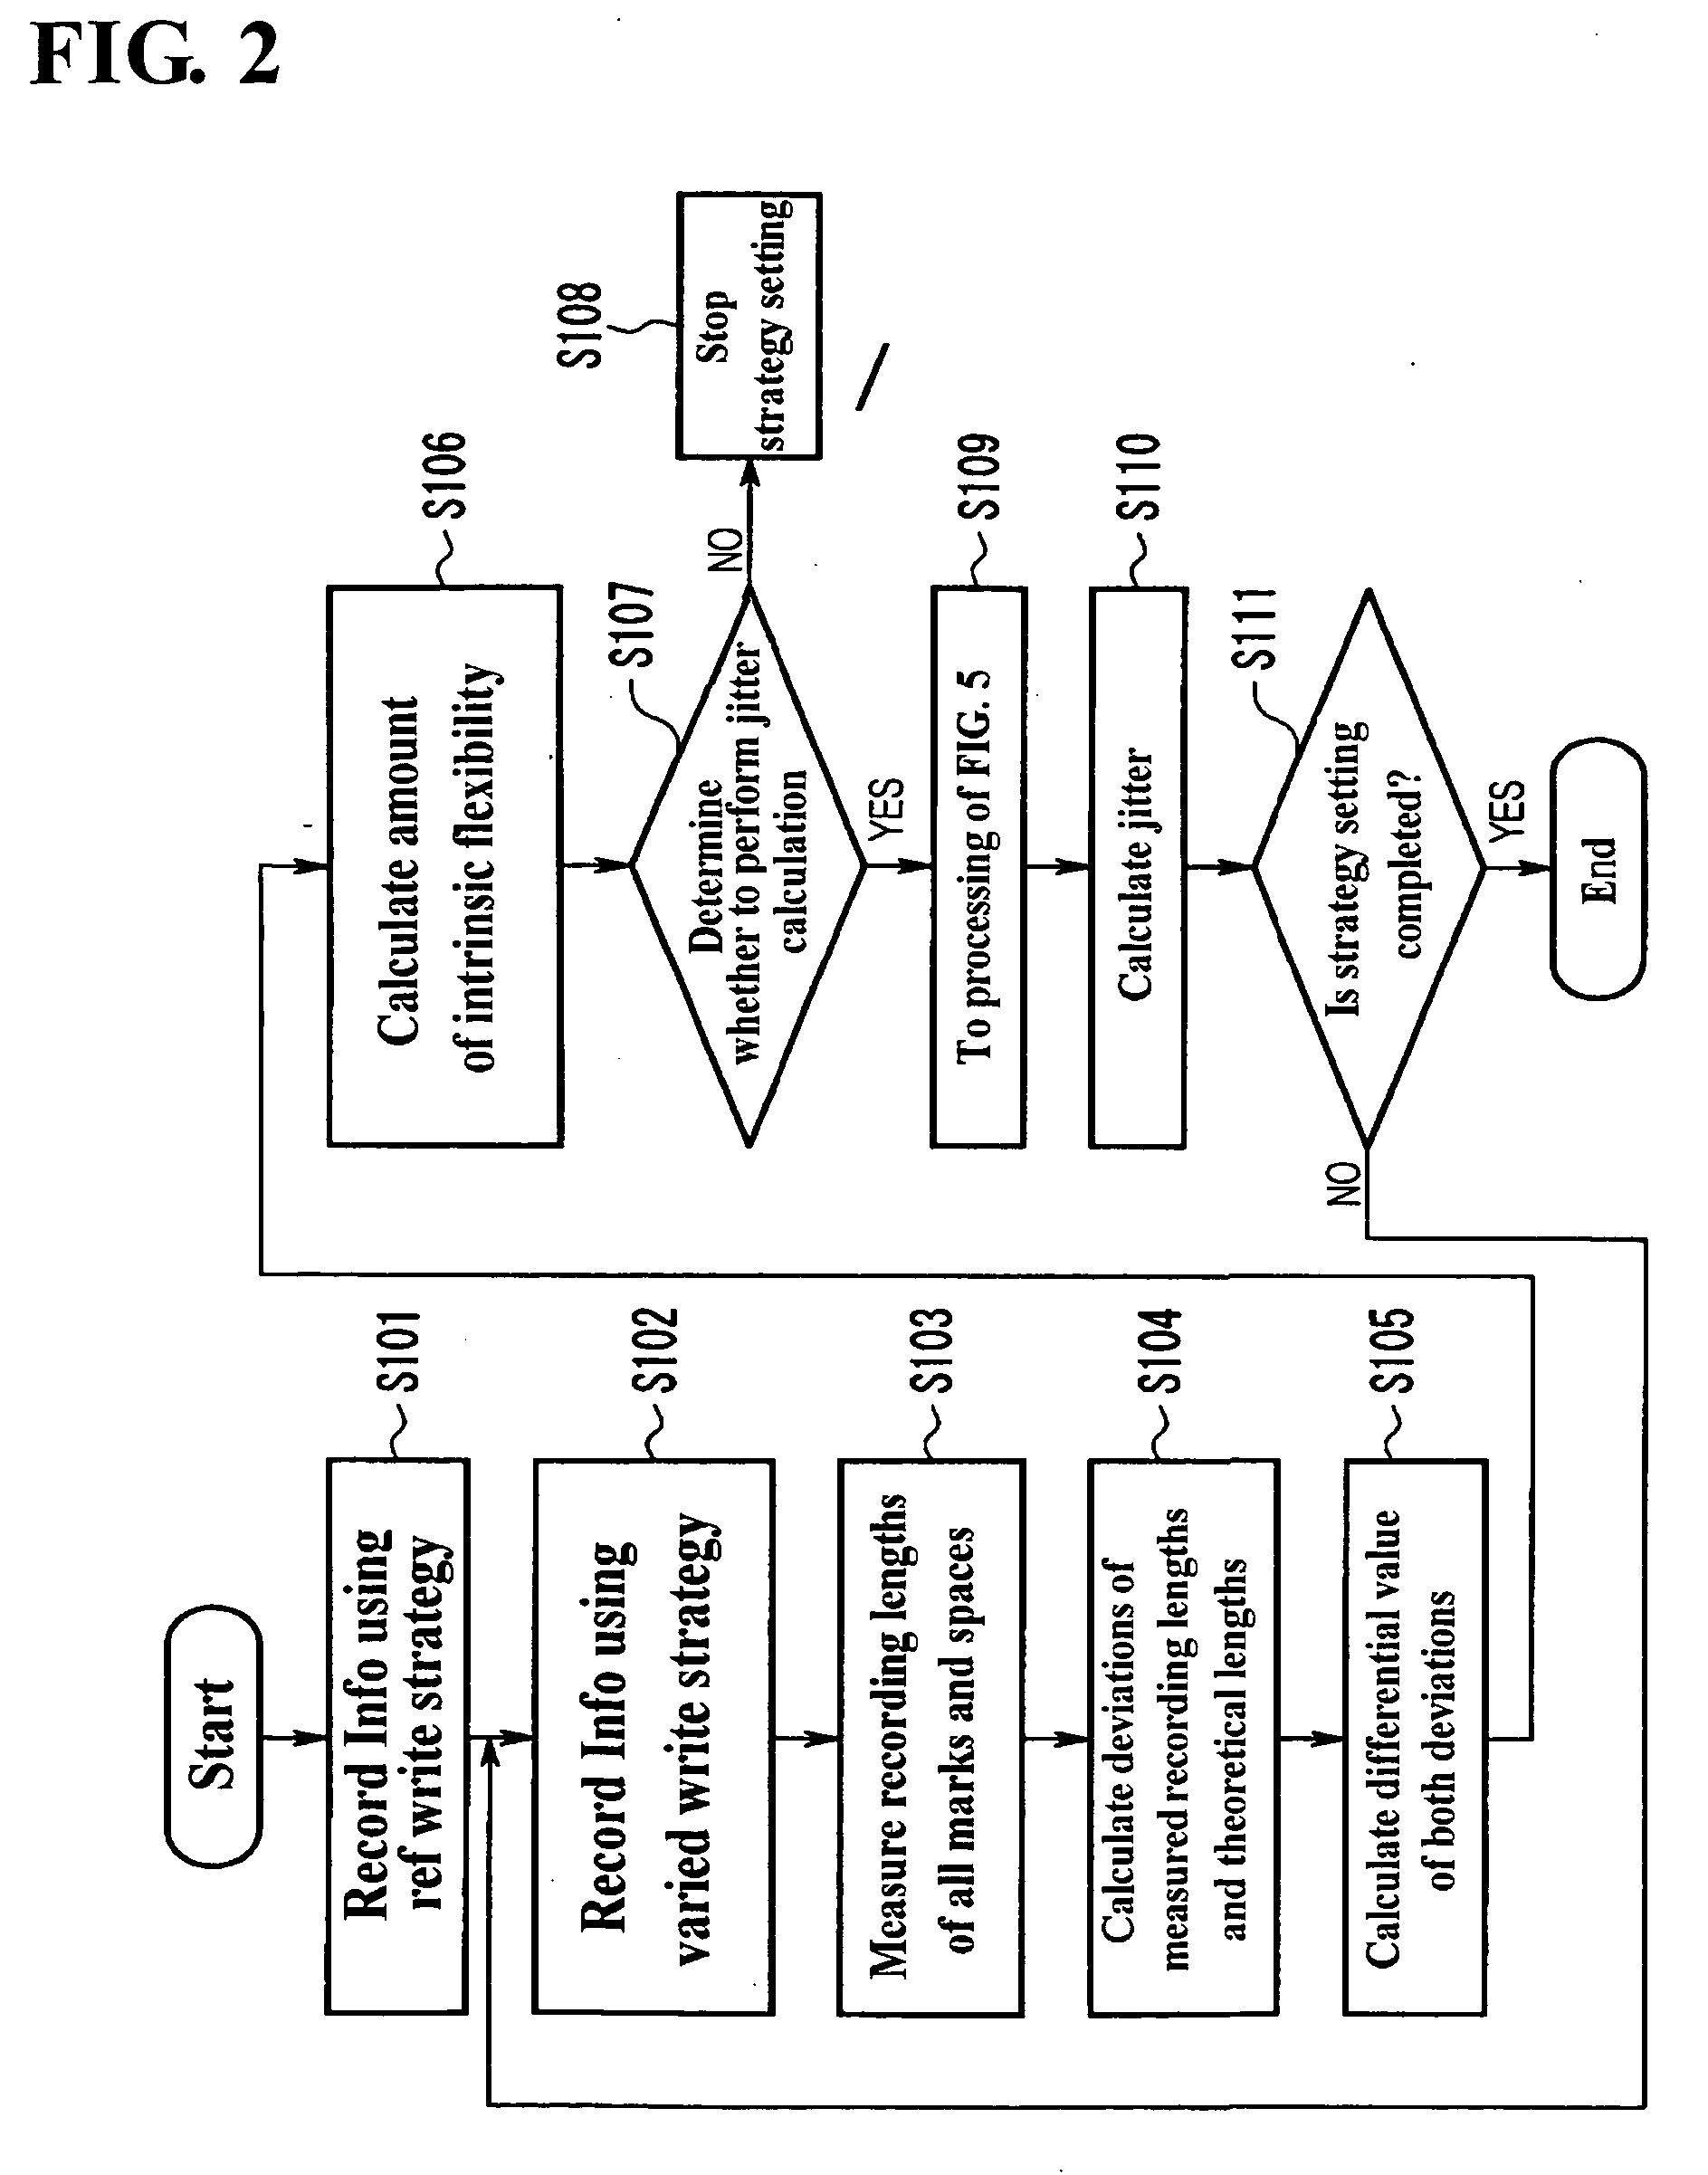 Optical disk device and program for recording and reproducing information on and from an optical recording medium